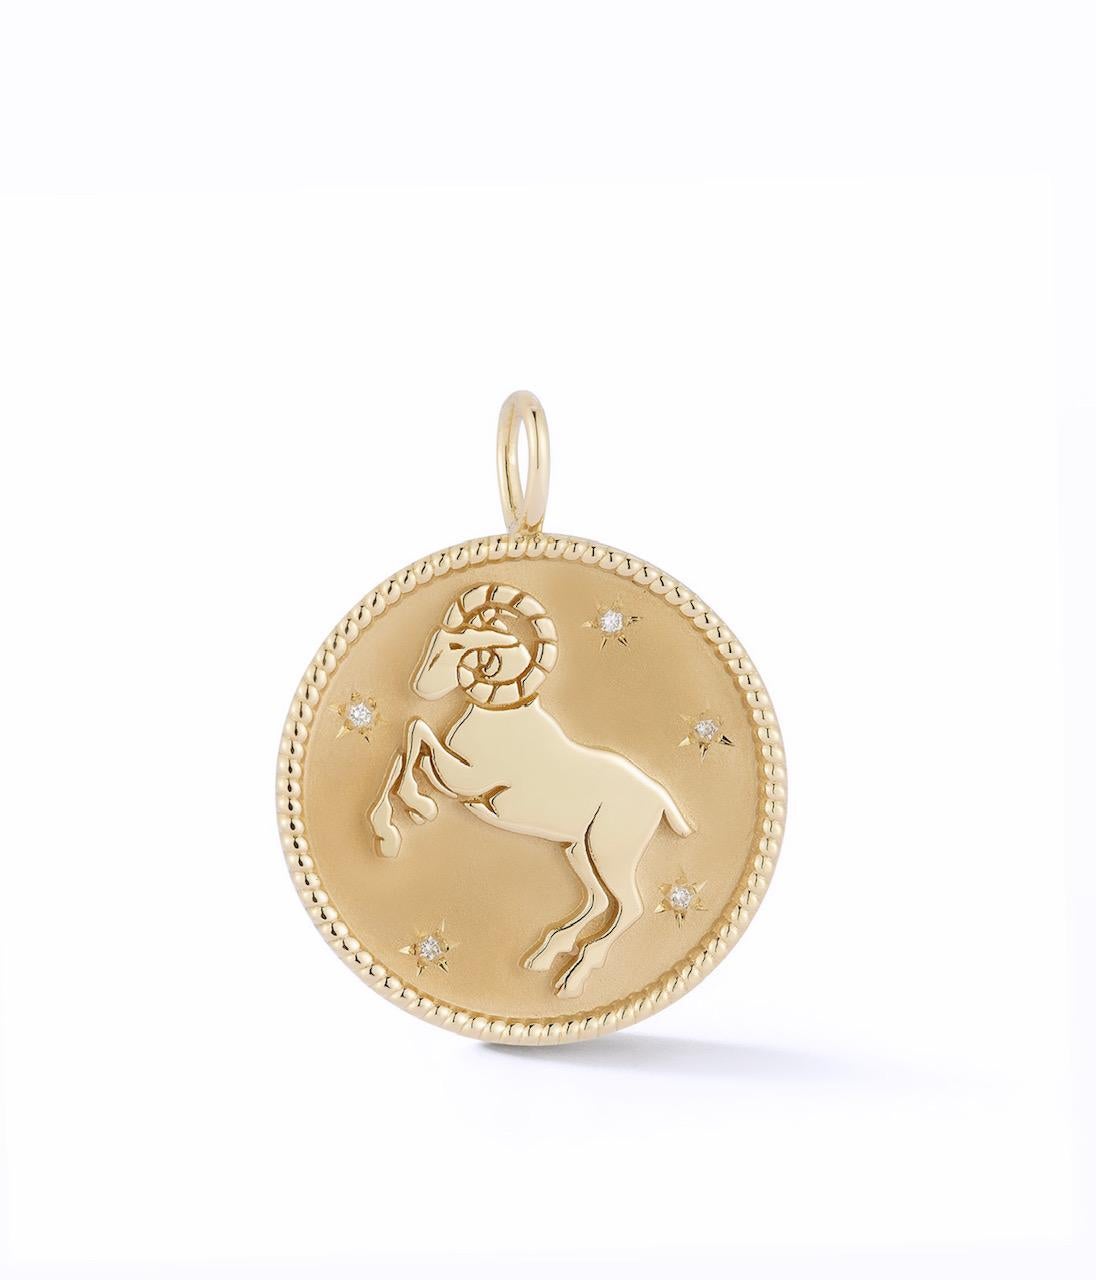 Women's or Men's Diamond and Gold Aries Medallion For Sale